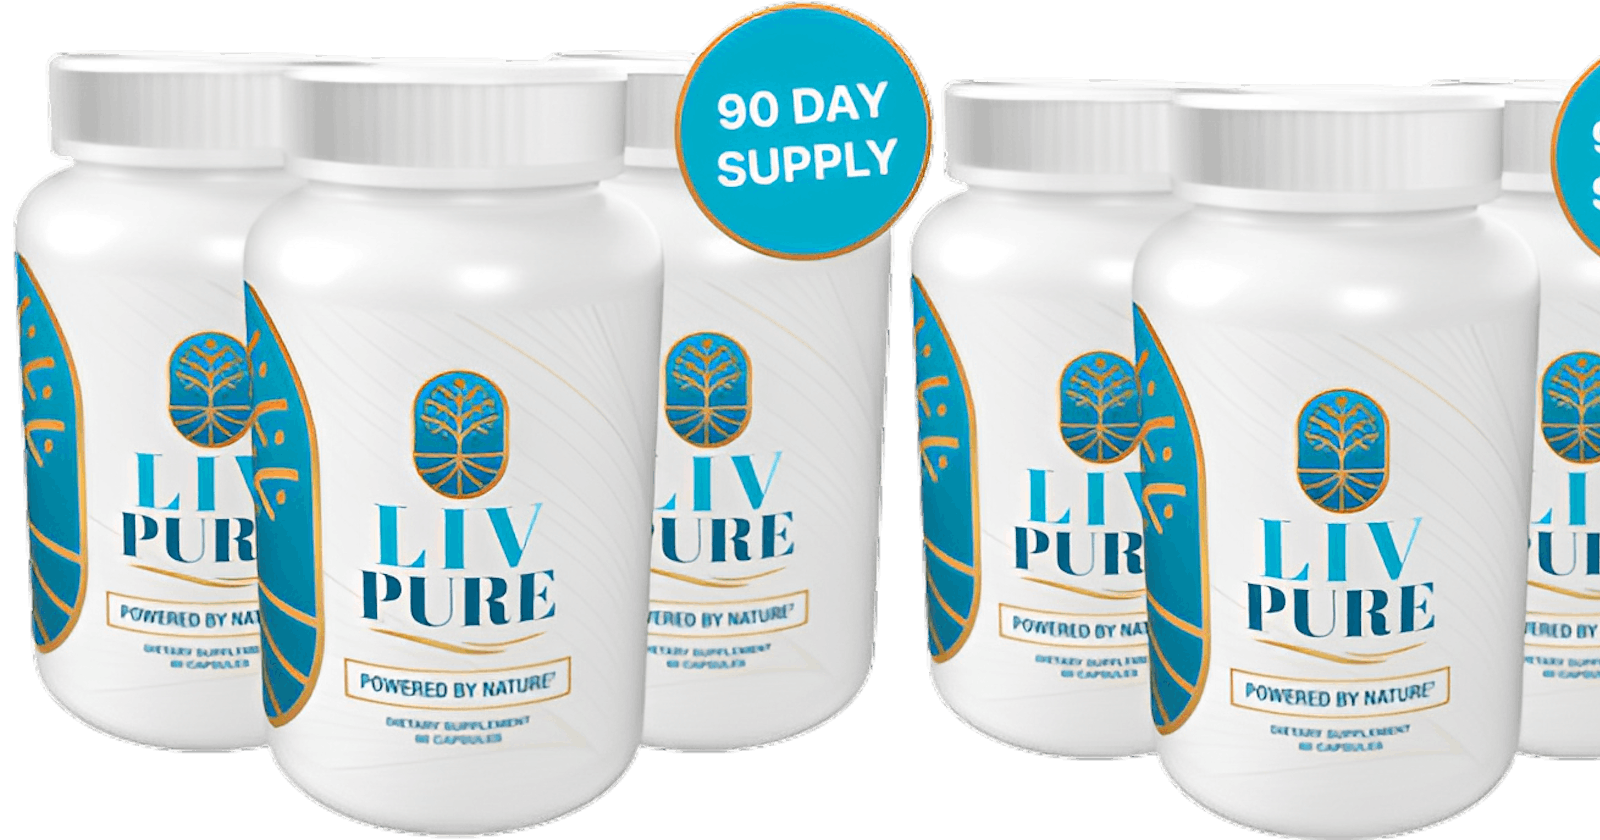 Liv Pure (#1 Pills In Marketplace) Liver Purification Complex and Liver Fat-Burning Complex!